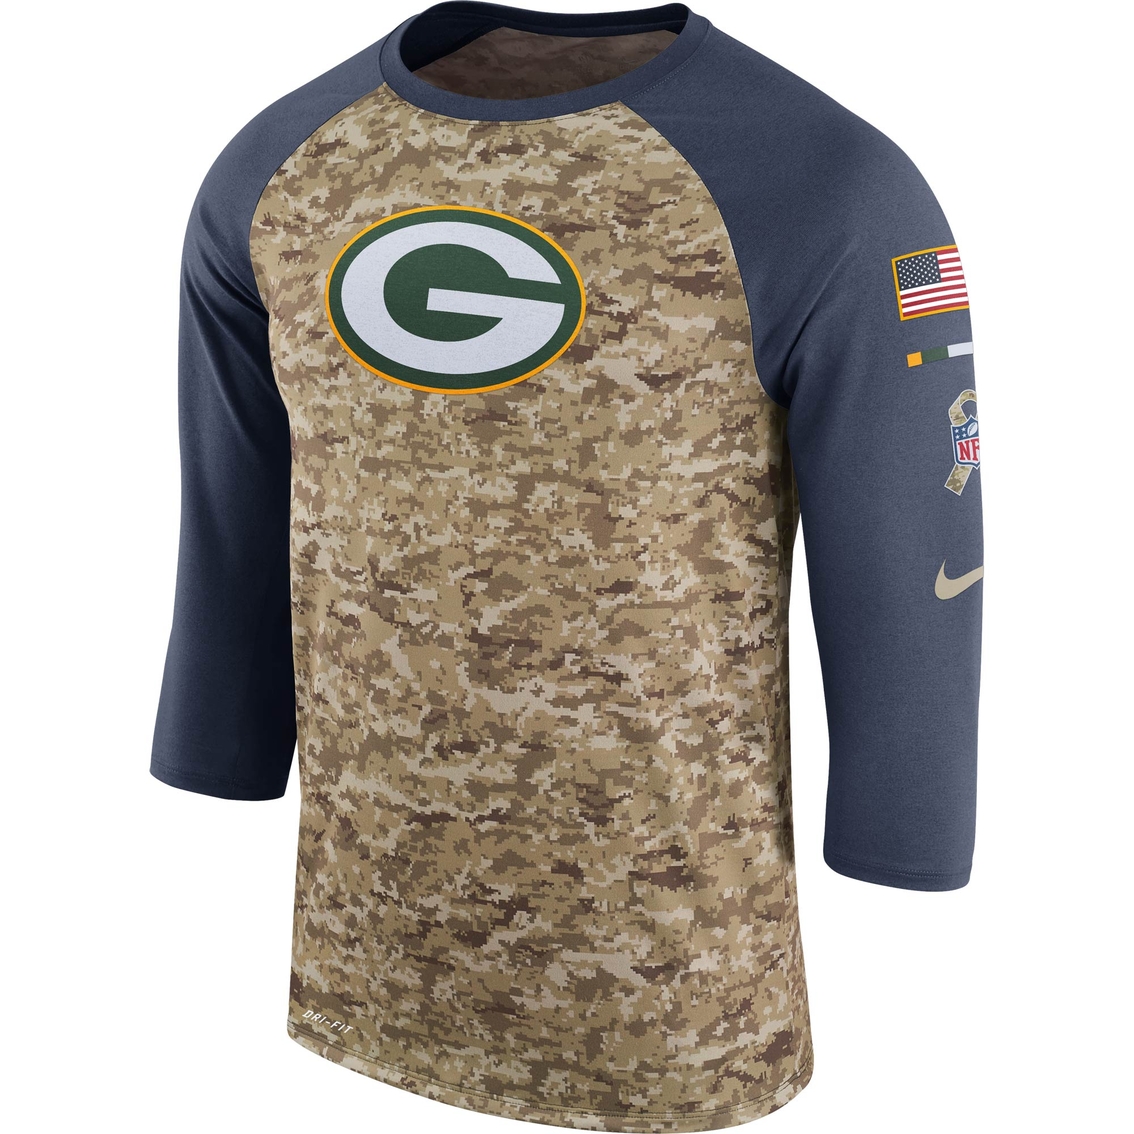 AJh,packers military appreciation 